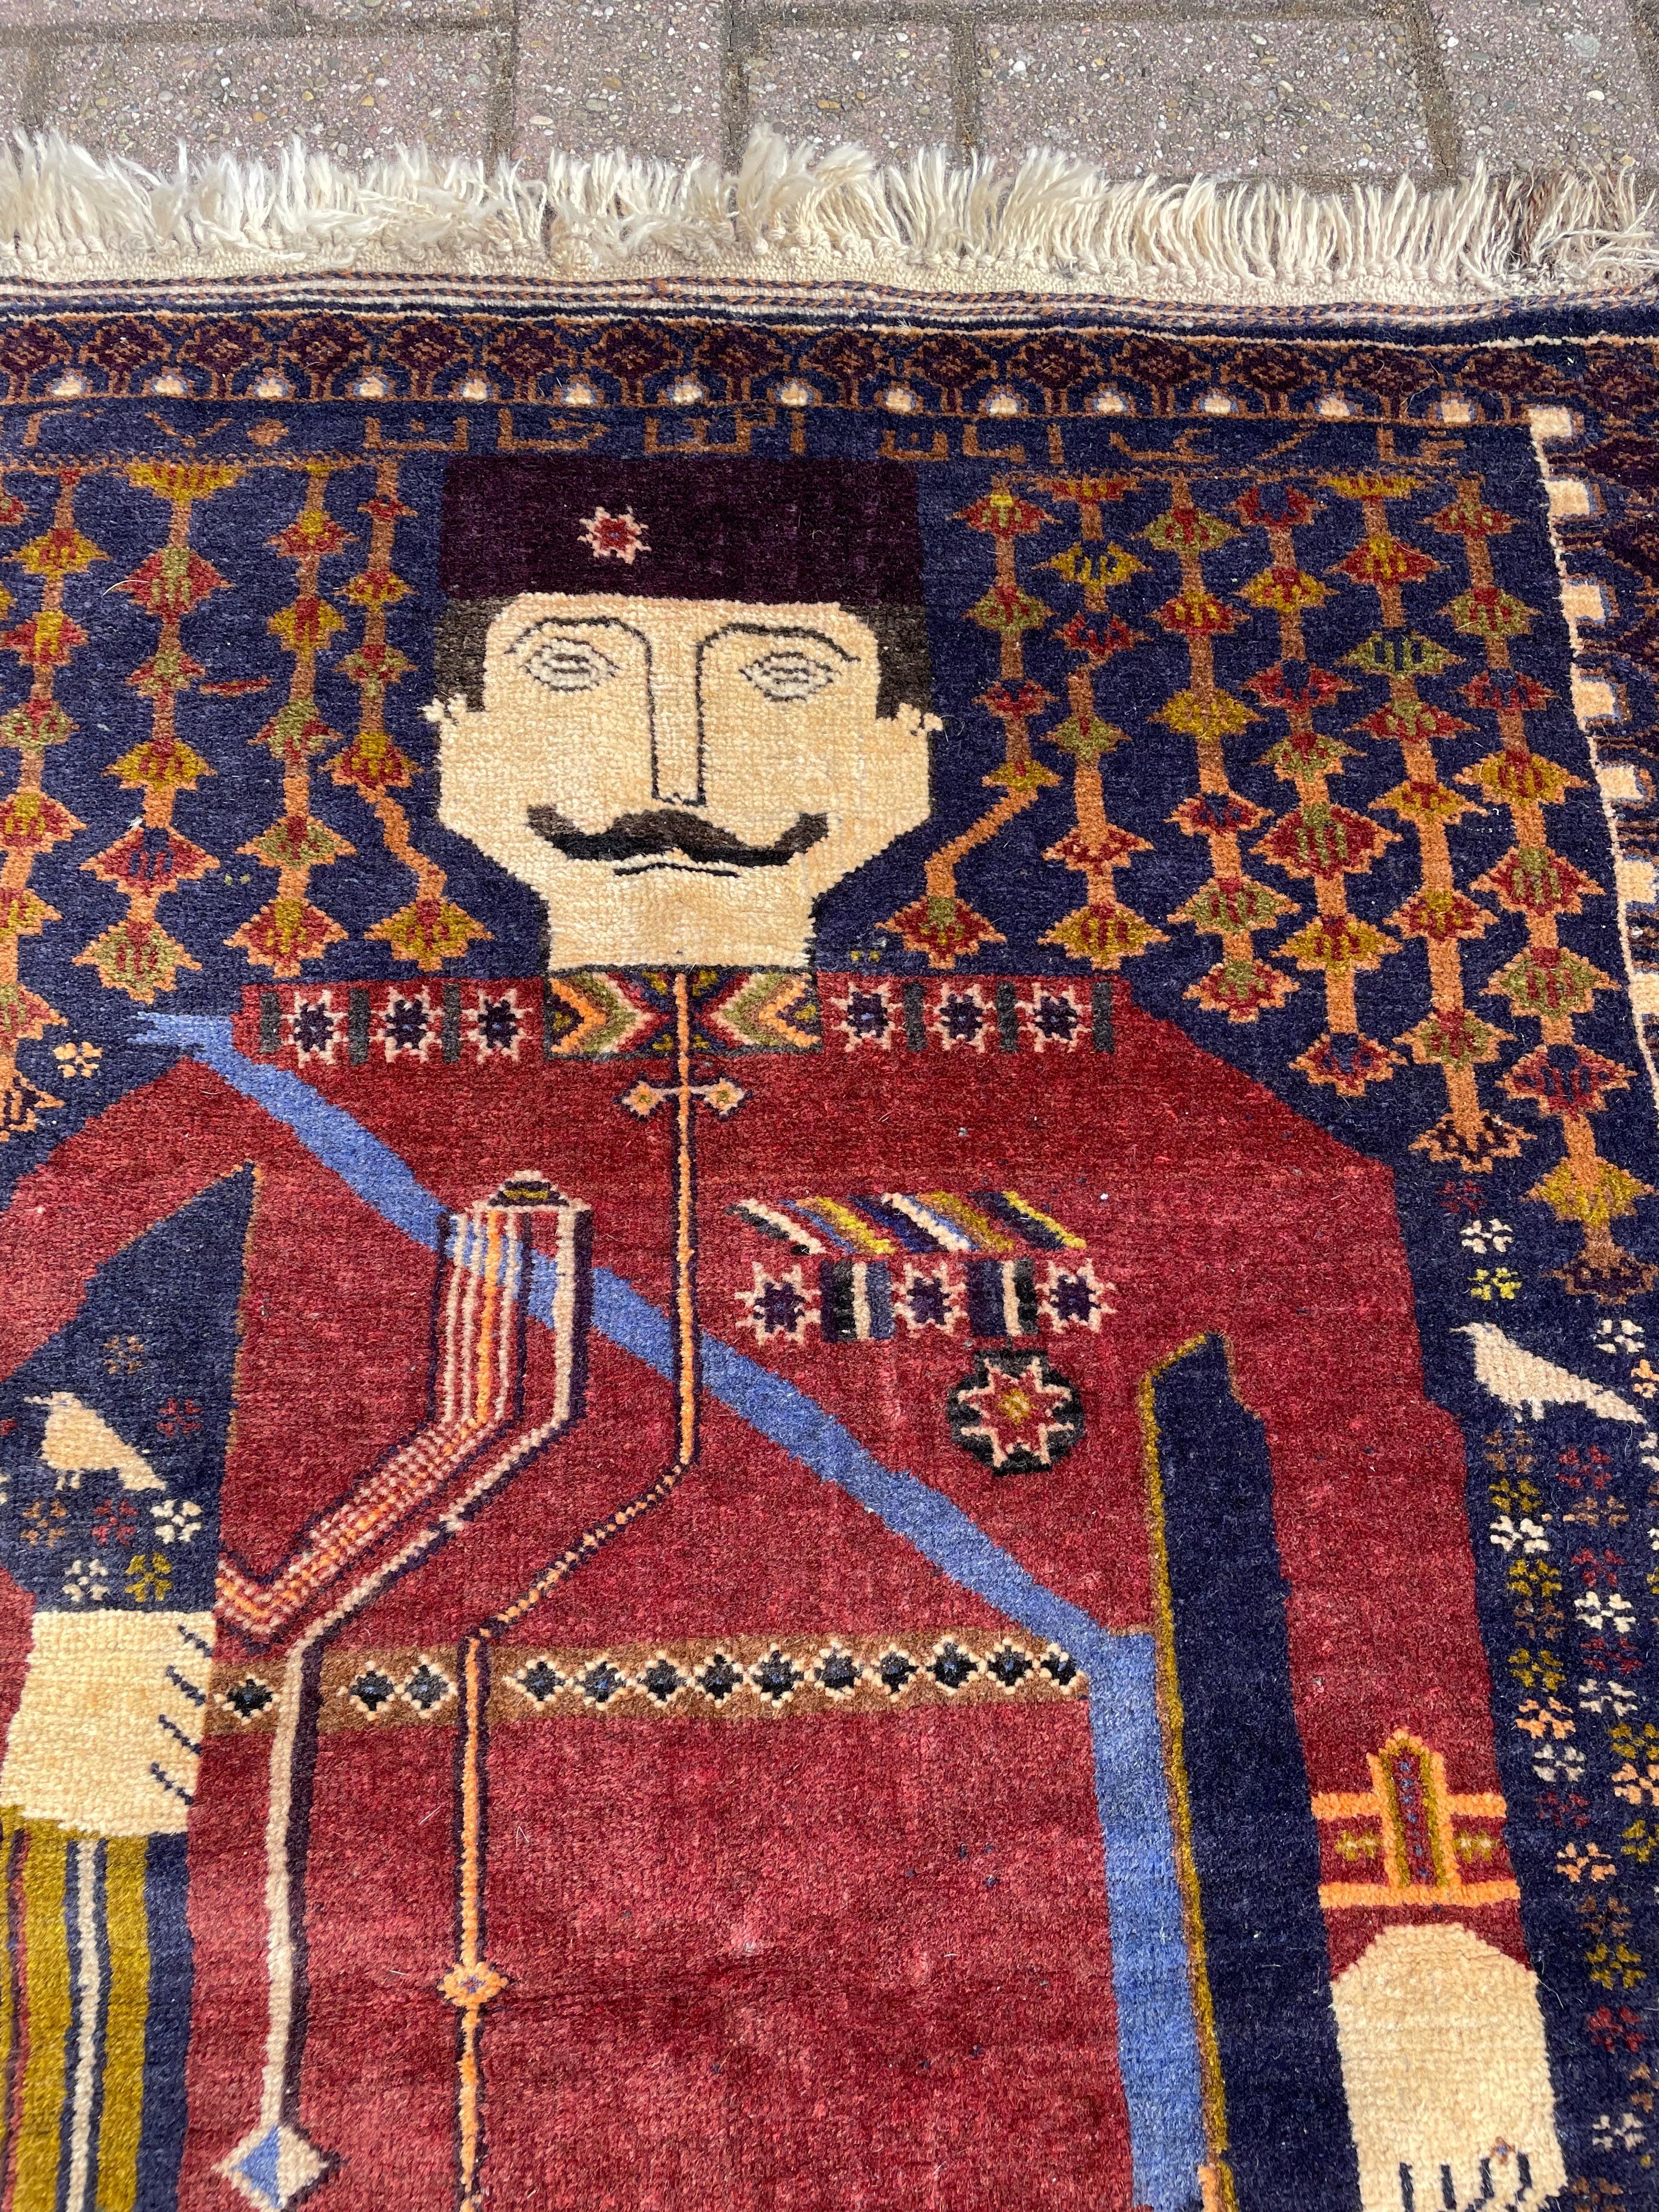 20th Century Rare Hand-Knotted War Rug Depicting Reign & King Amanullah Khan 1919 Afghanistan For Sale